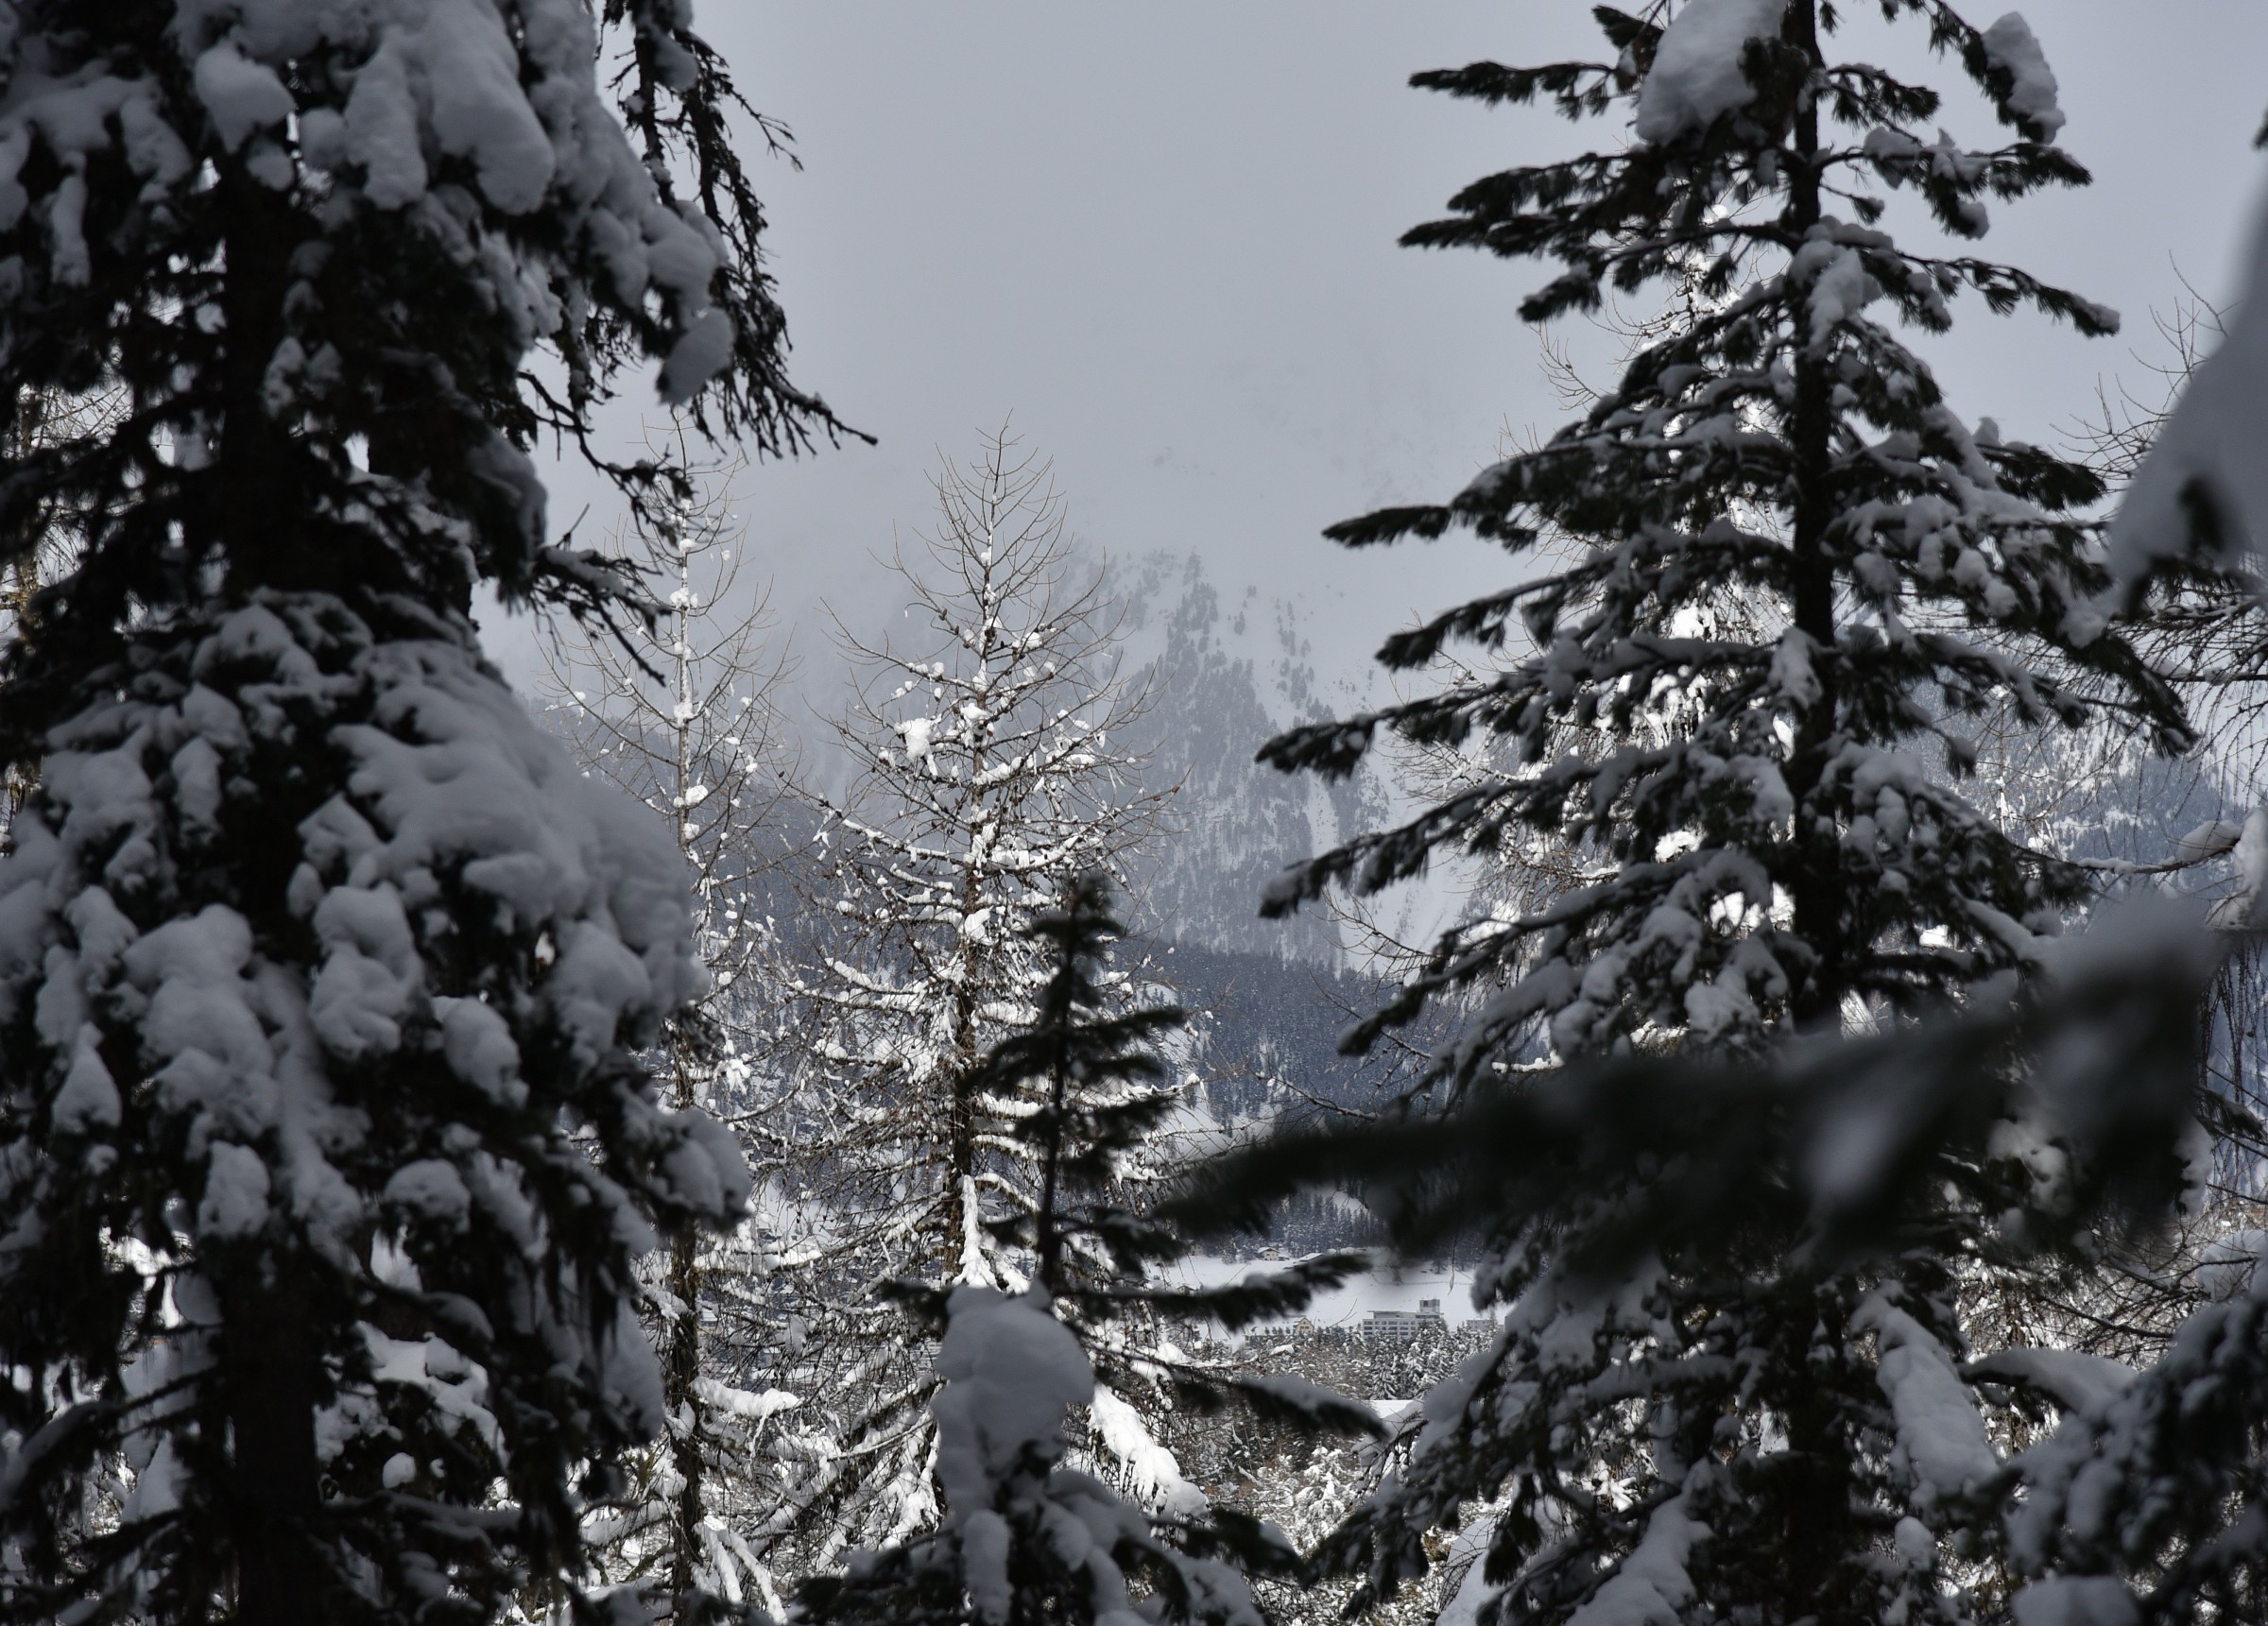 15 - among the pine trees in the snow-covered path...